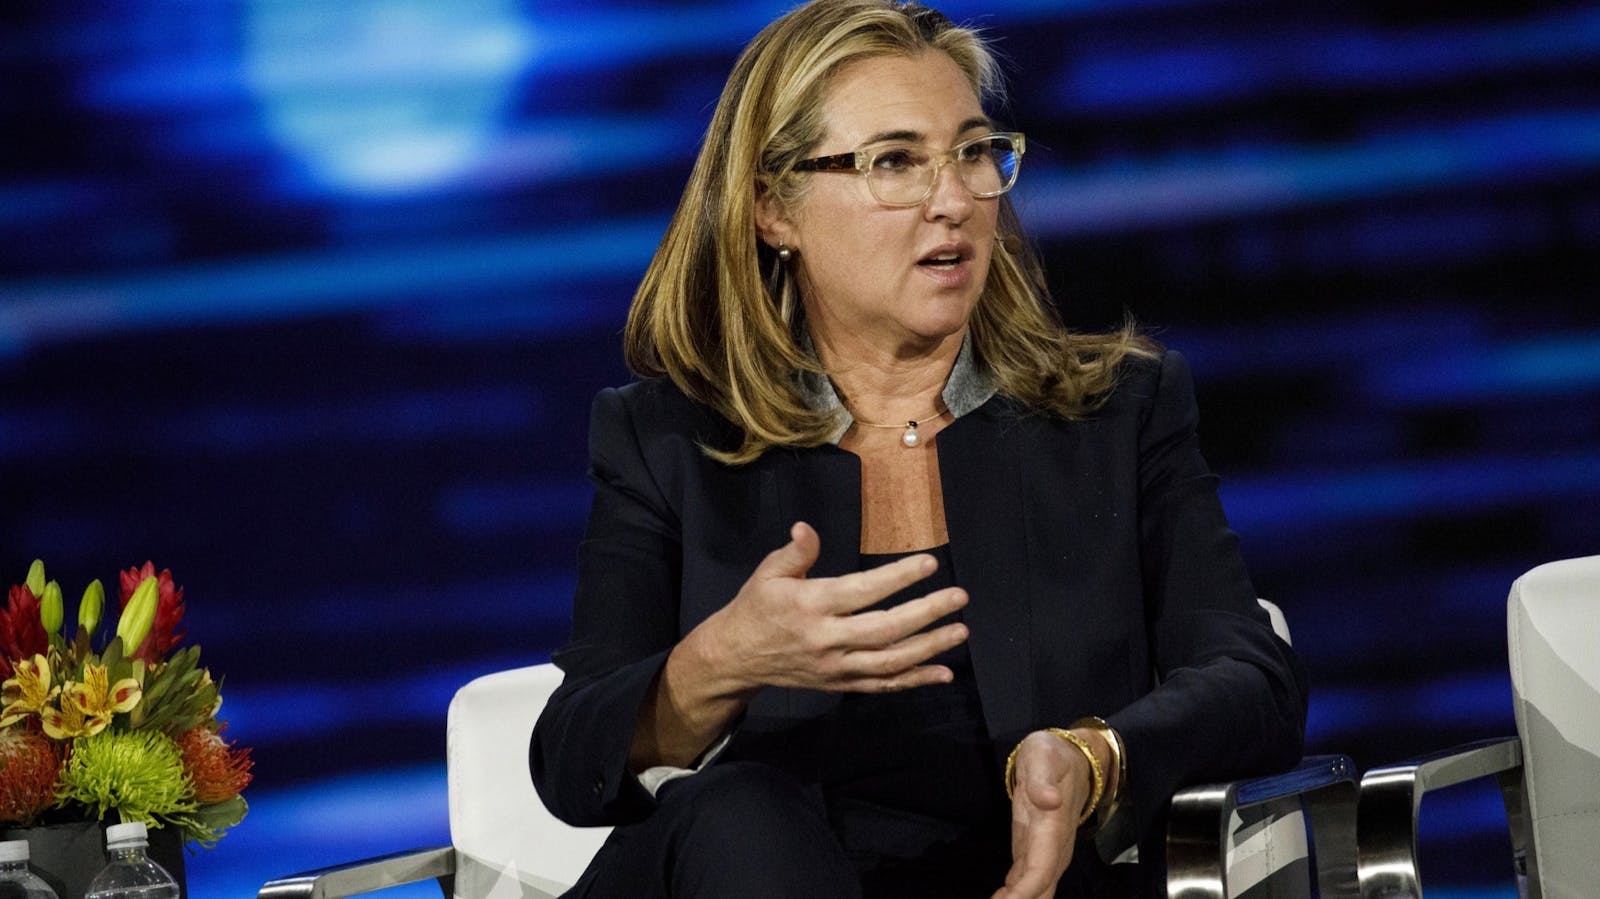 Vice CEO Nancy Dubuc. Photo by Bloomberg.